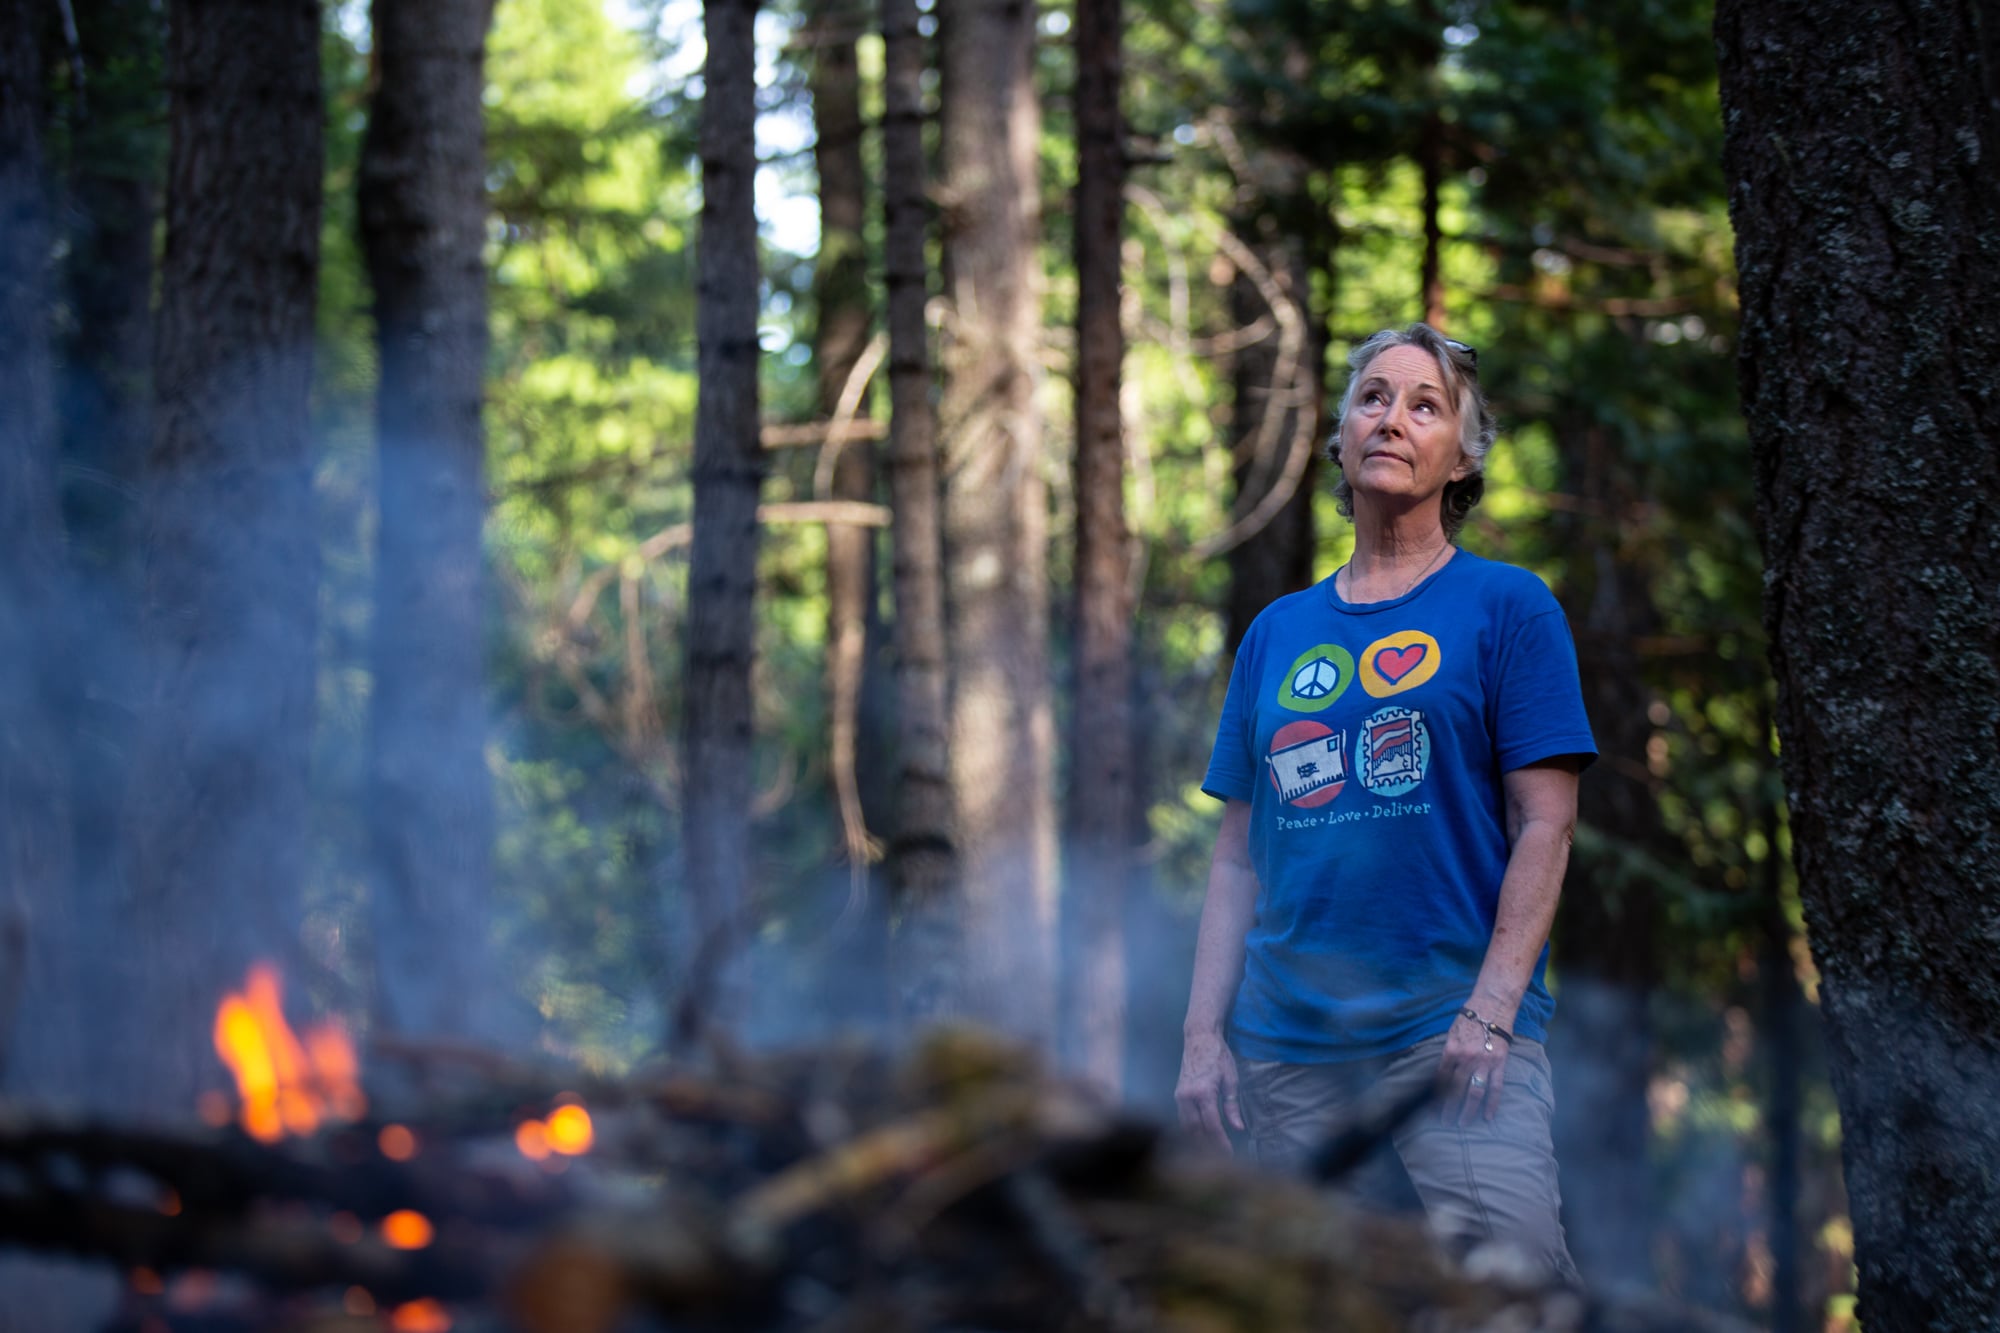 Kelly Loew is creating a defensible space around her home in Shingletown, California, by trimming pine branches and burning them in a pile. It’s a common but dangerous practice in the forested community. (Anton L. Delgado/News21)